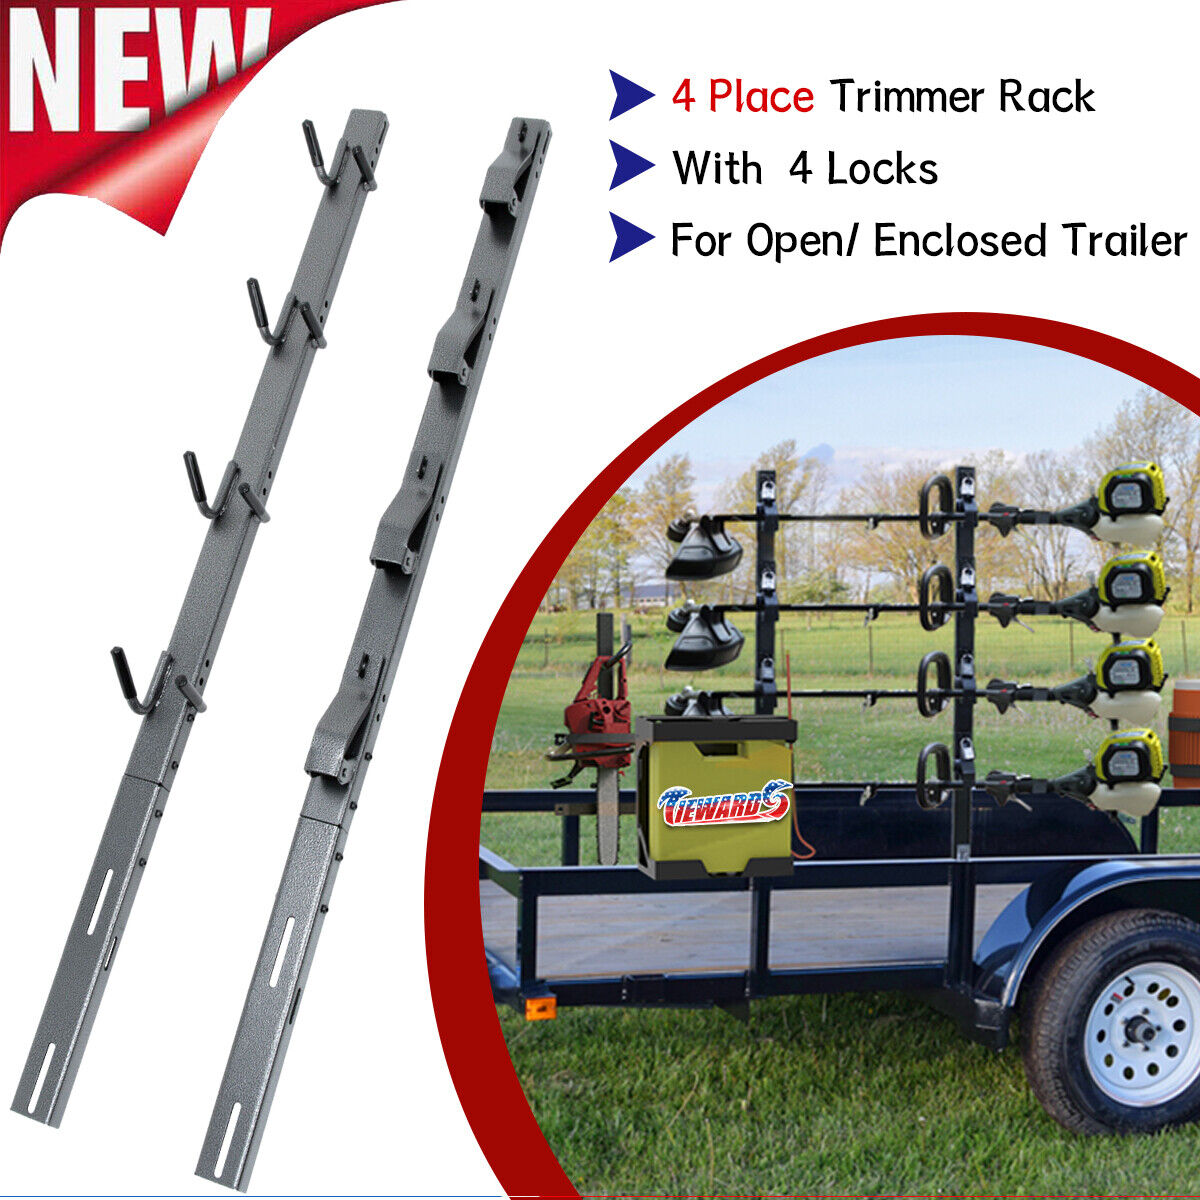 4 Place Lockable Weedeater Trimmer Rack Set Upgraded For Enclosed / Open Trailer